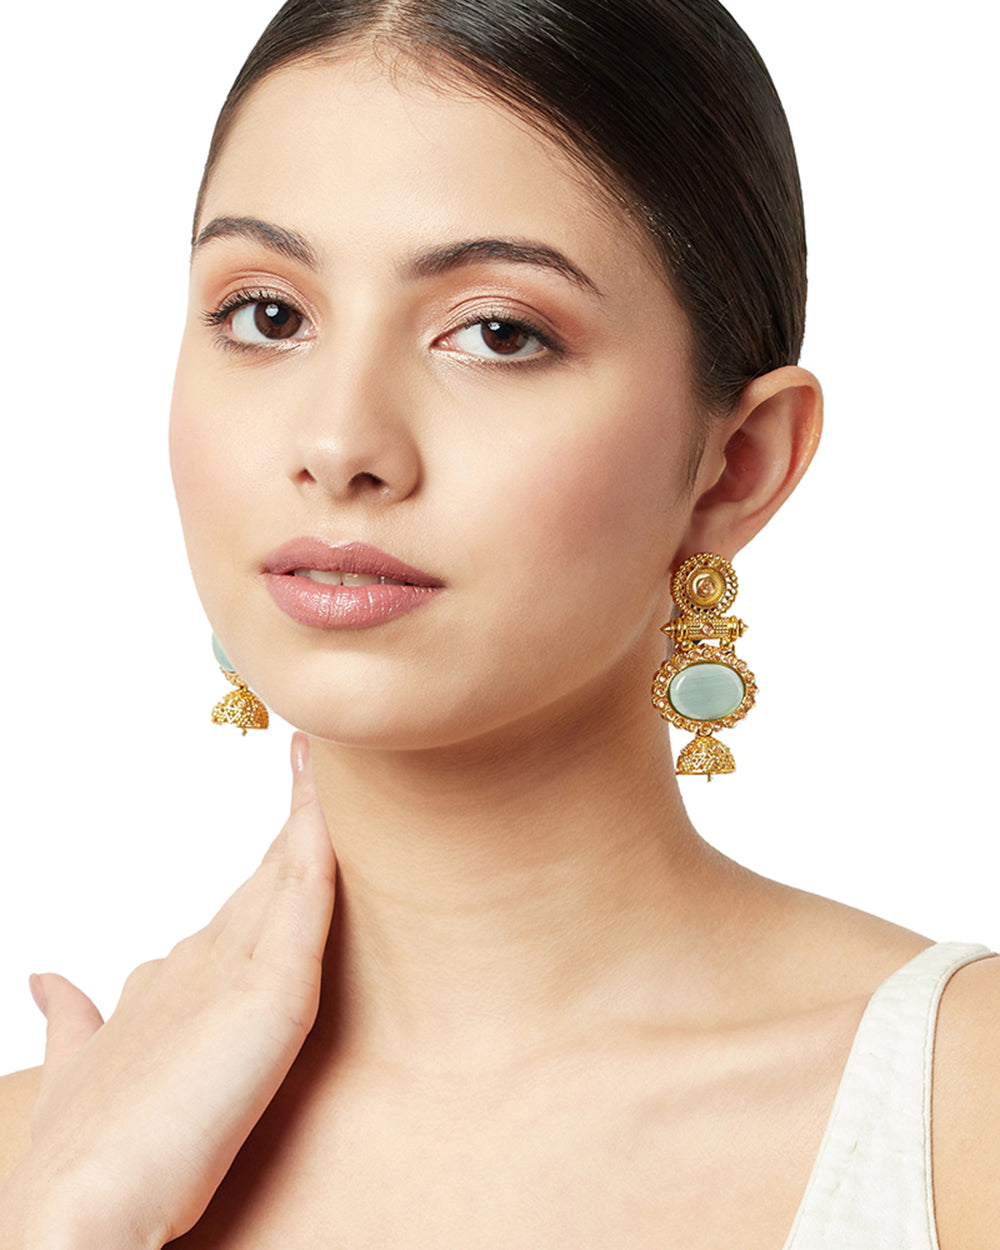 Women's Gold Oppulence Traditional Gold Plated Earrings With Blue Stones - Voylla